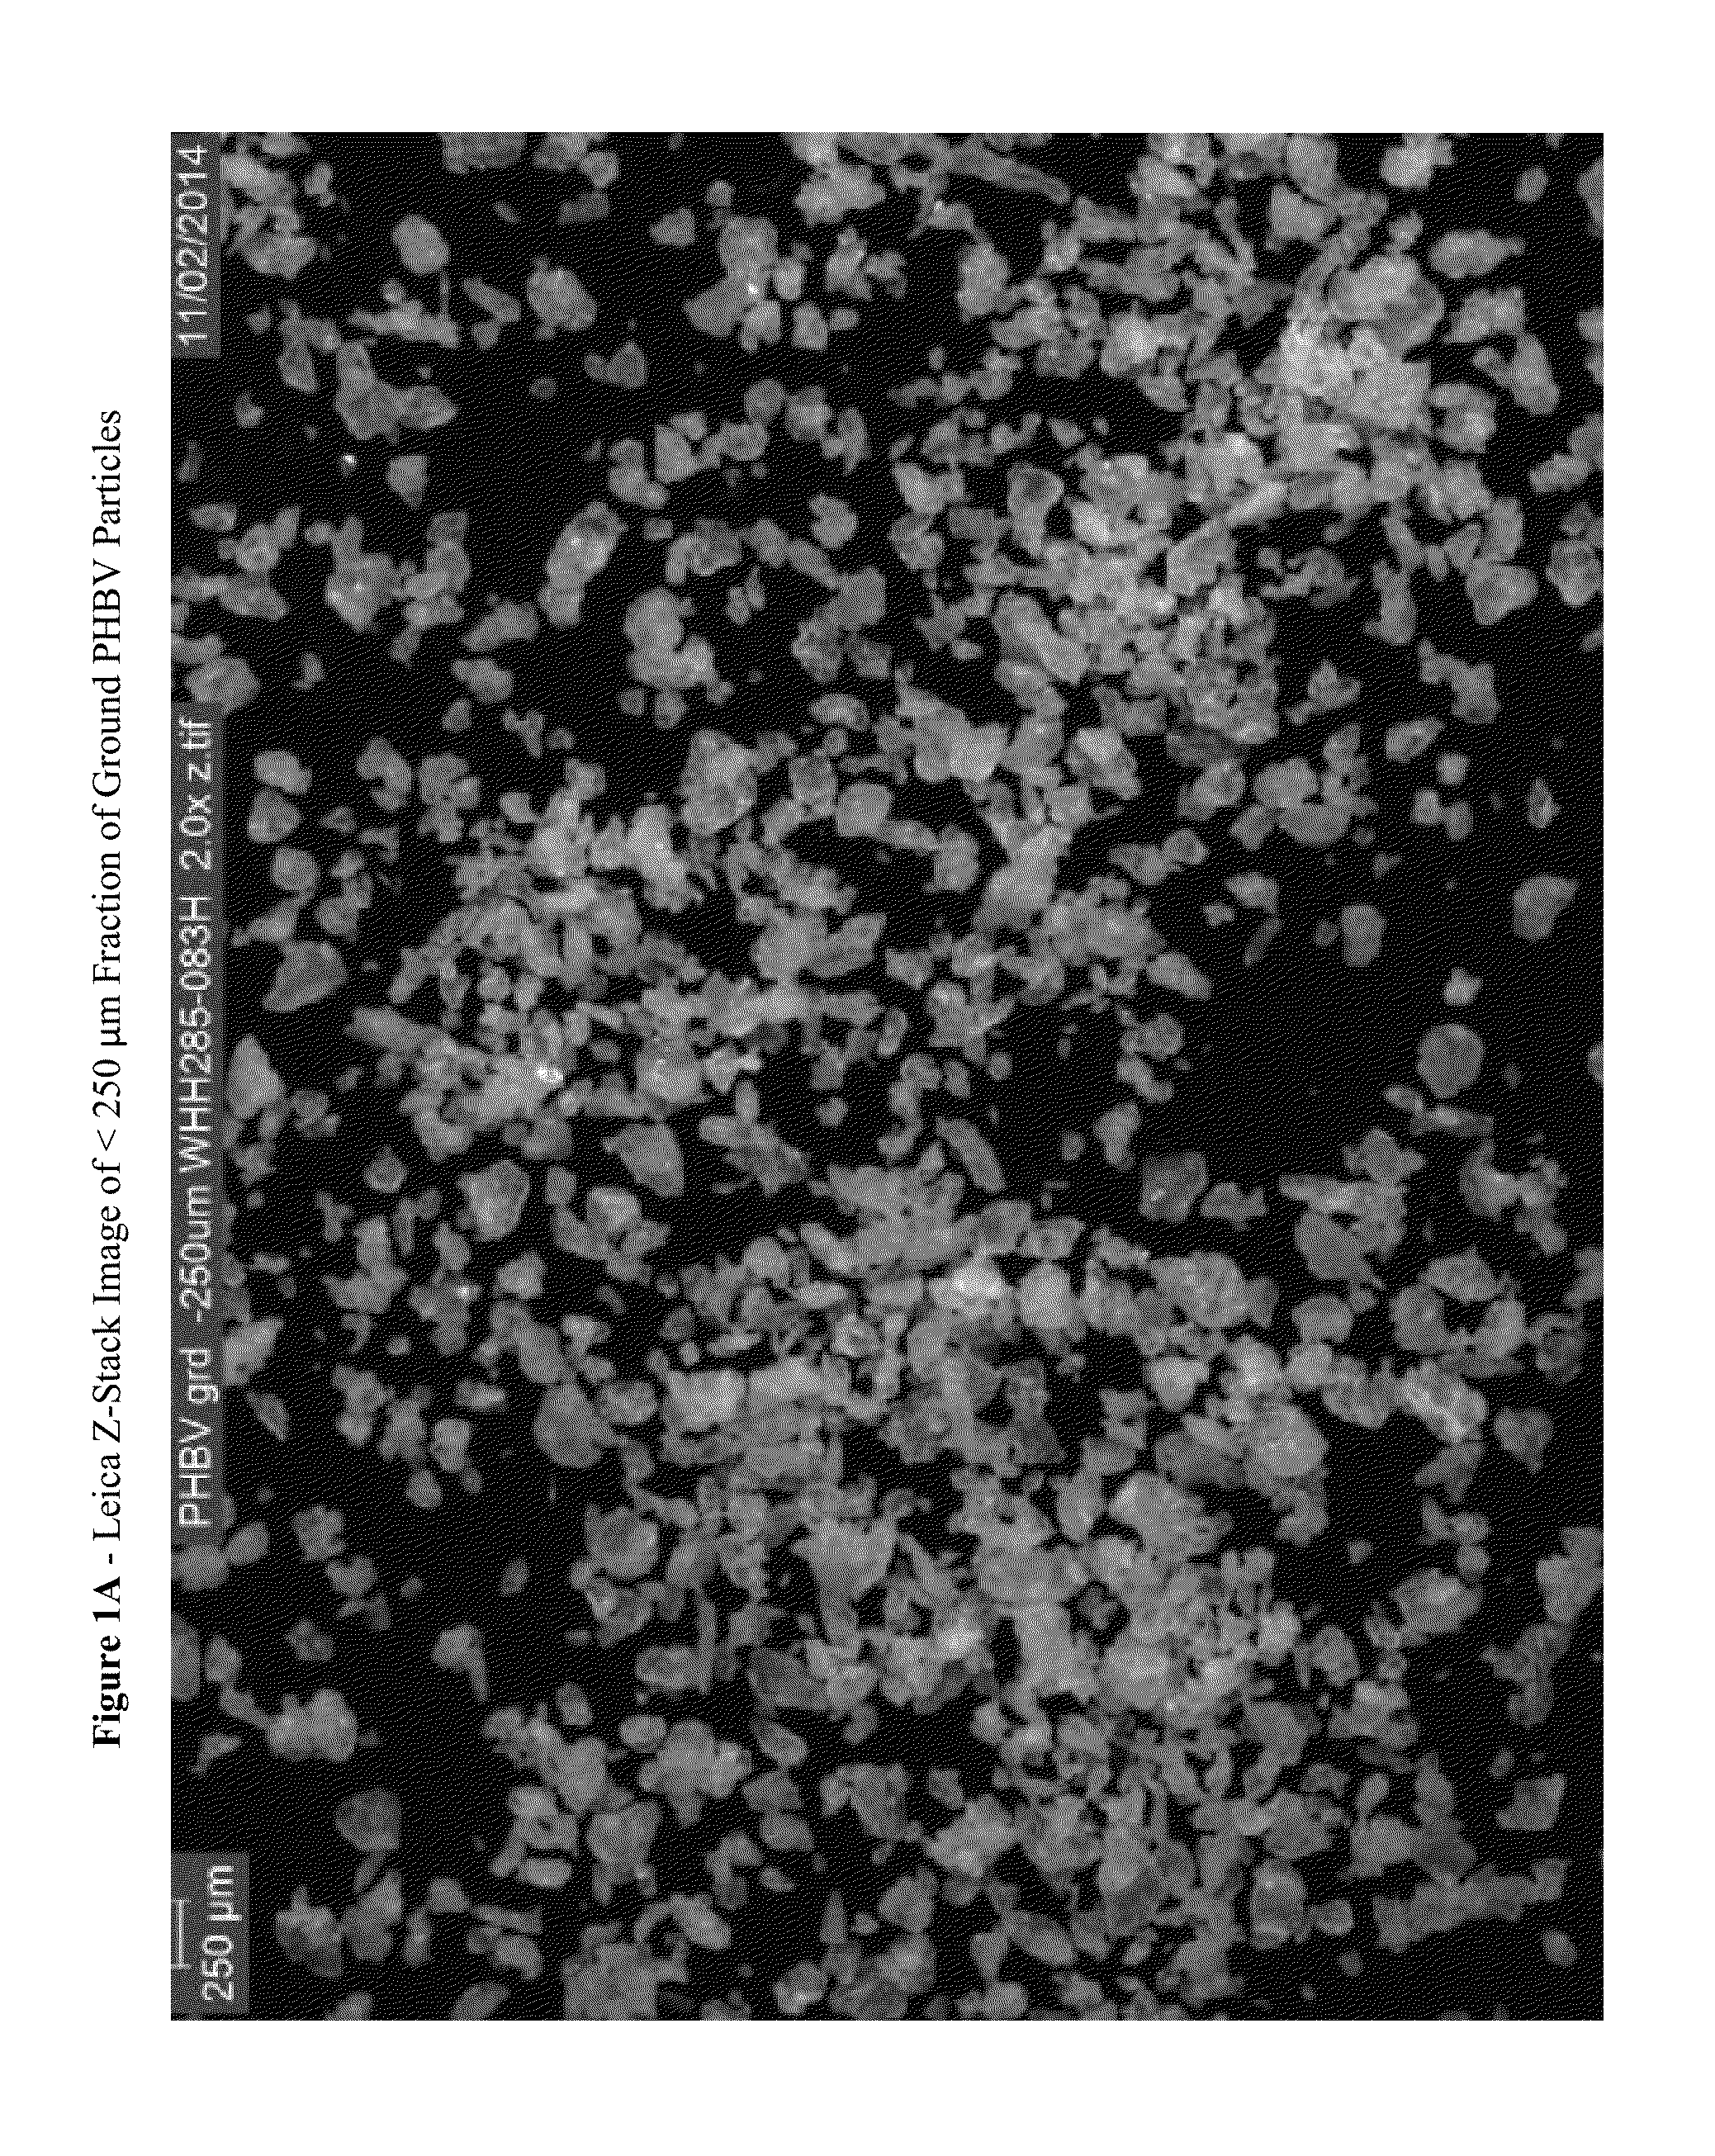 Skin cleansing compositions comprising biodegradable abrasive particles